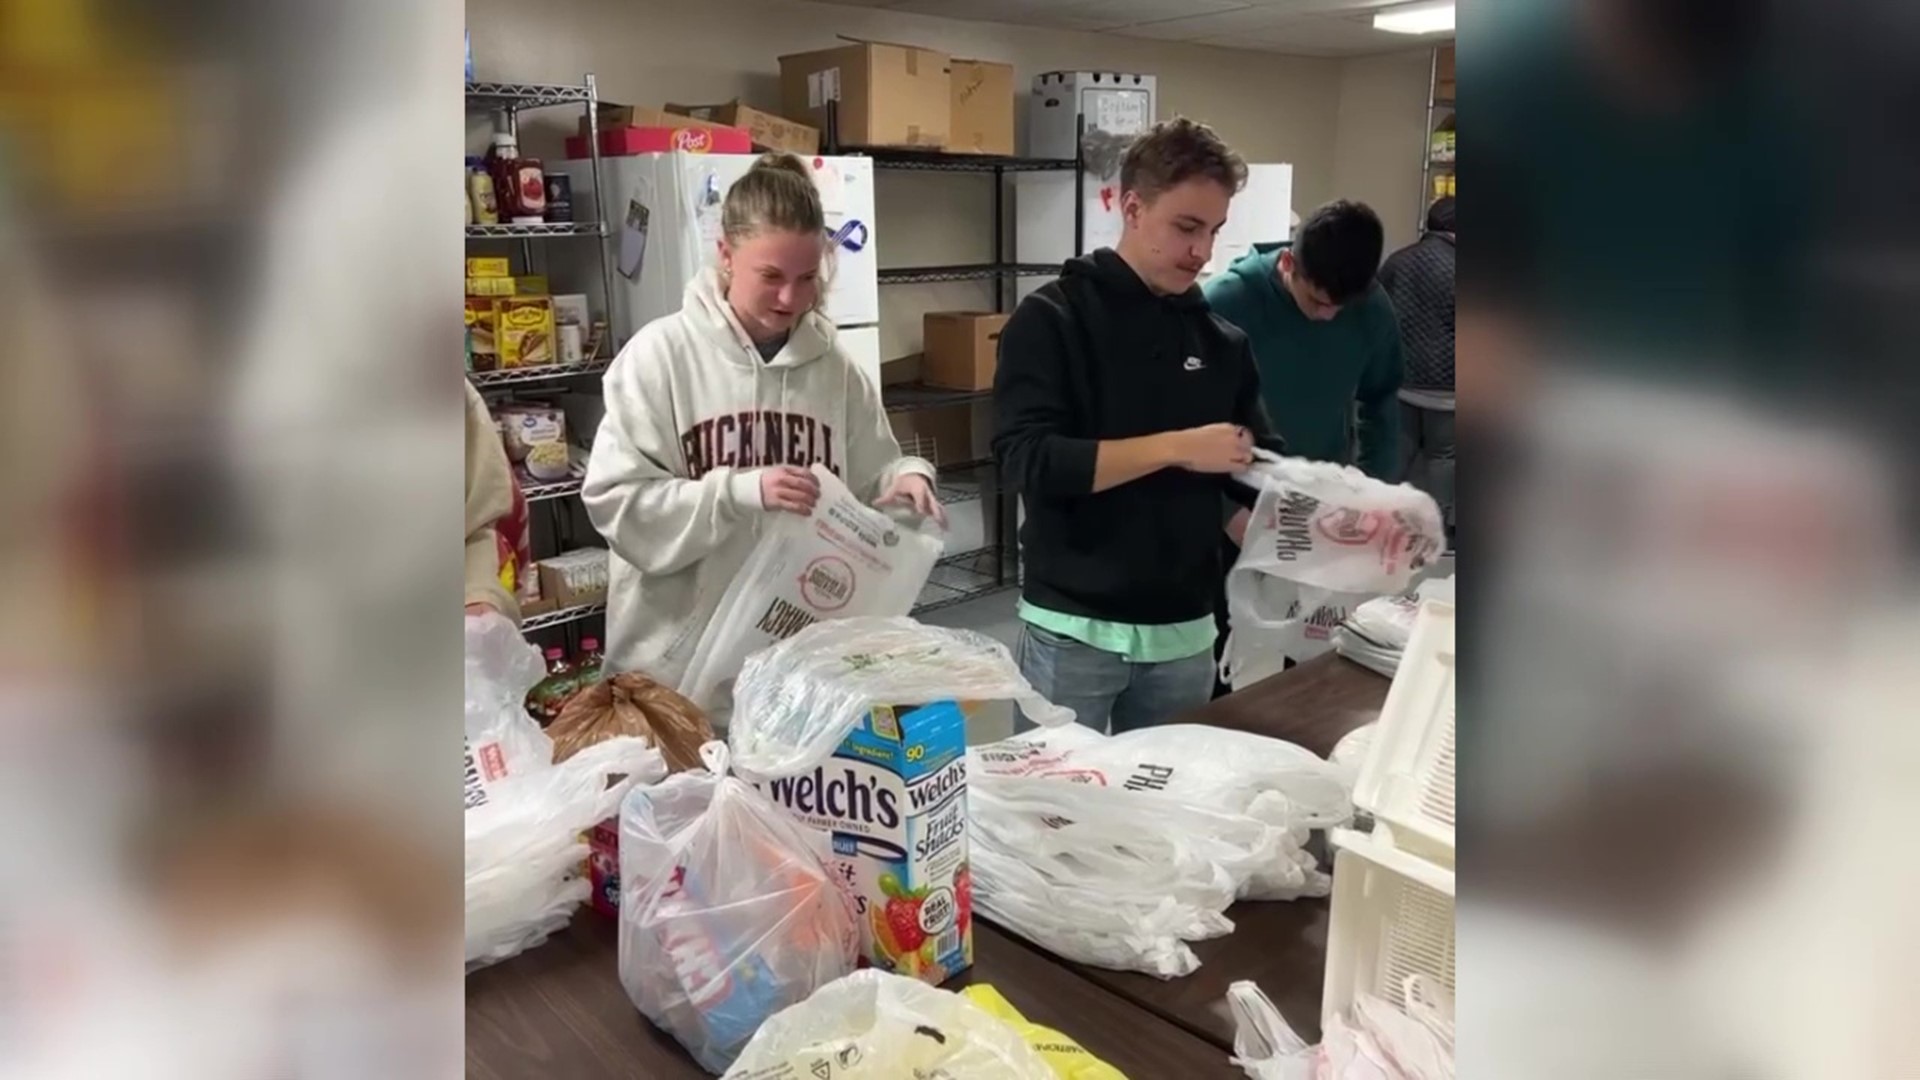 Newswatch 16's Nikki Krize found some of the students plan to continue volunteering even after the semester ends.